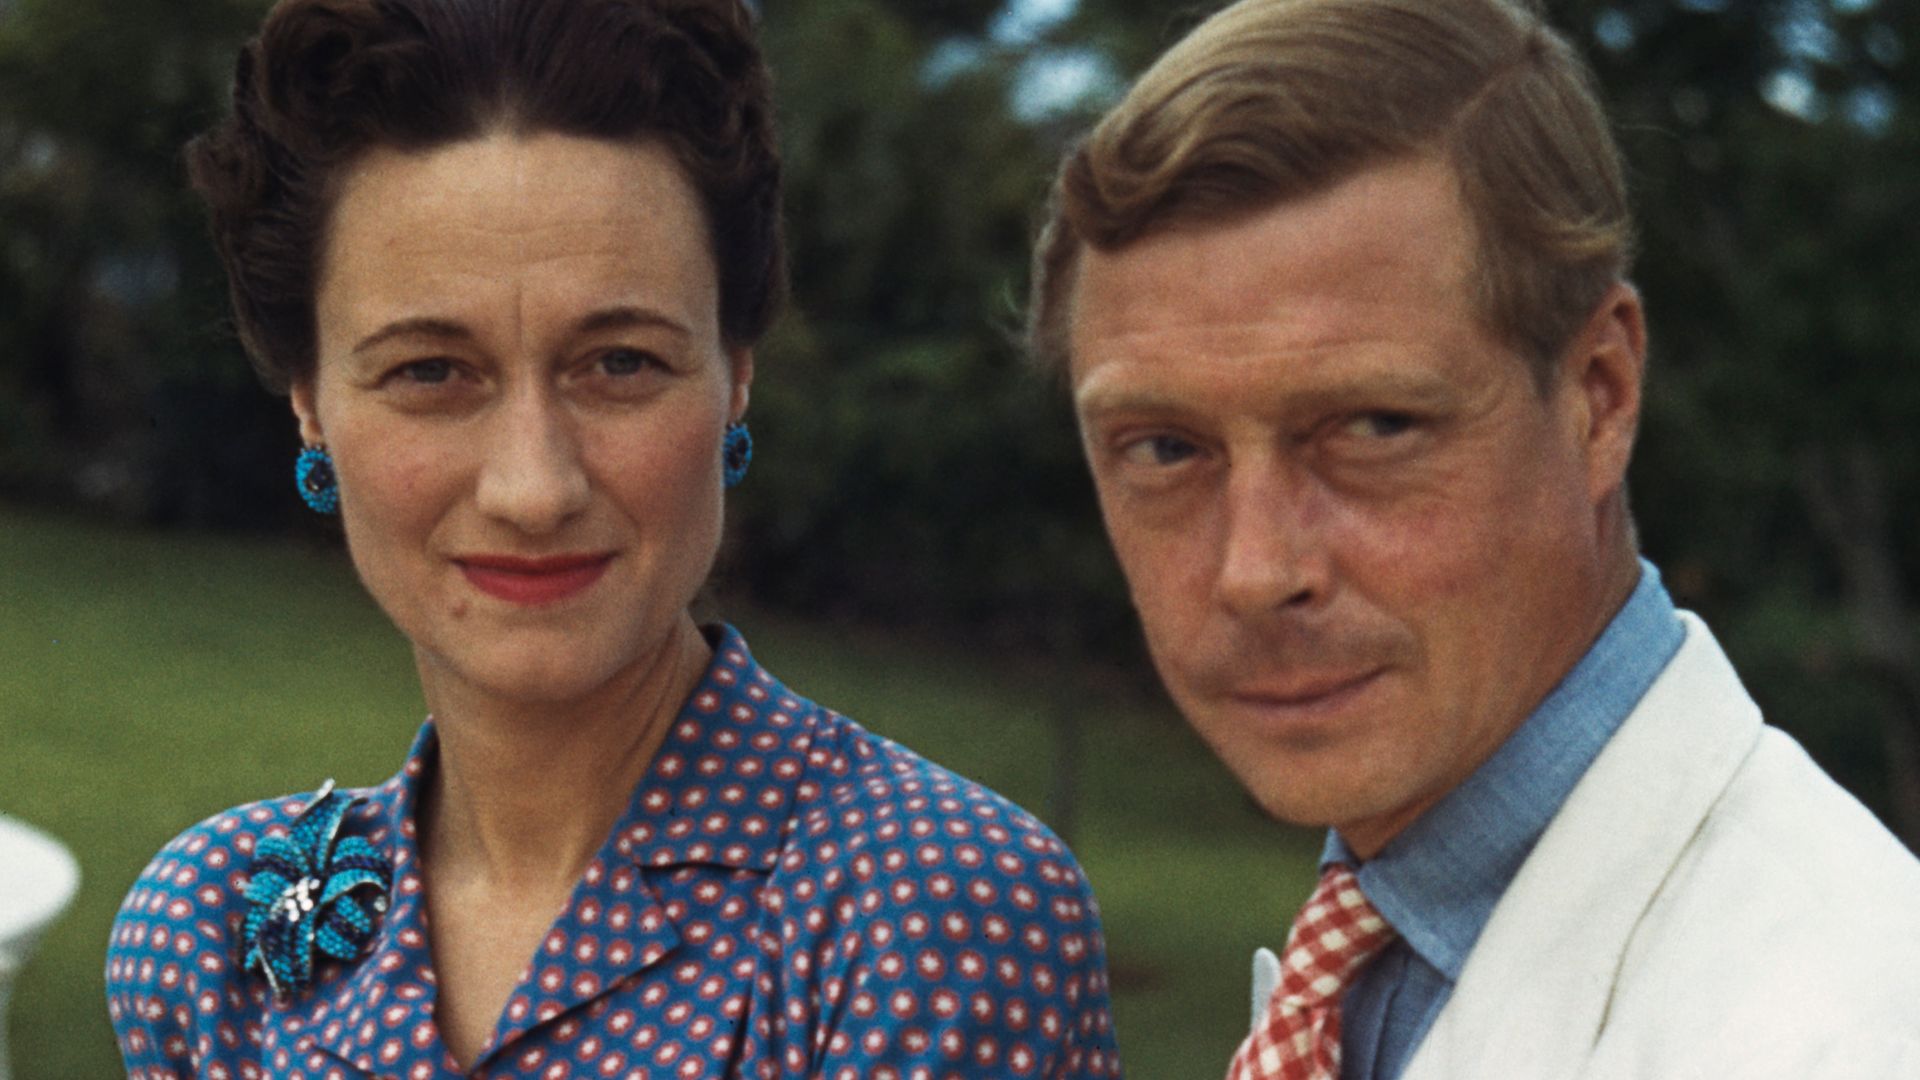 Wallis Simpson in a blue dress and the Duke of Windsor sitting outside